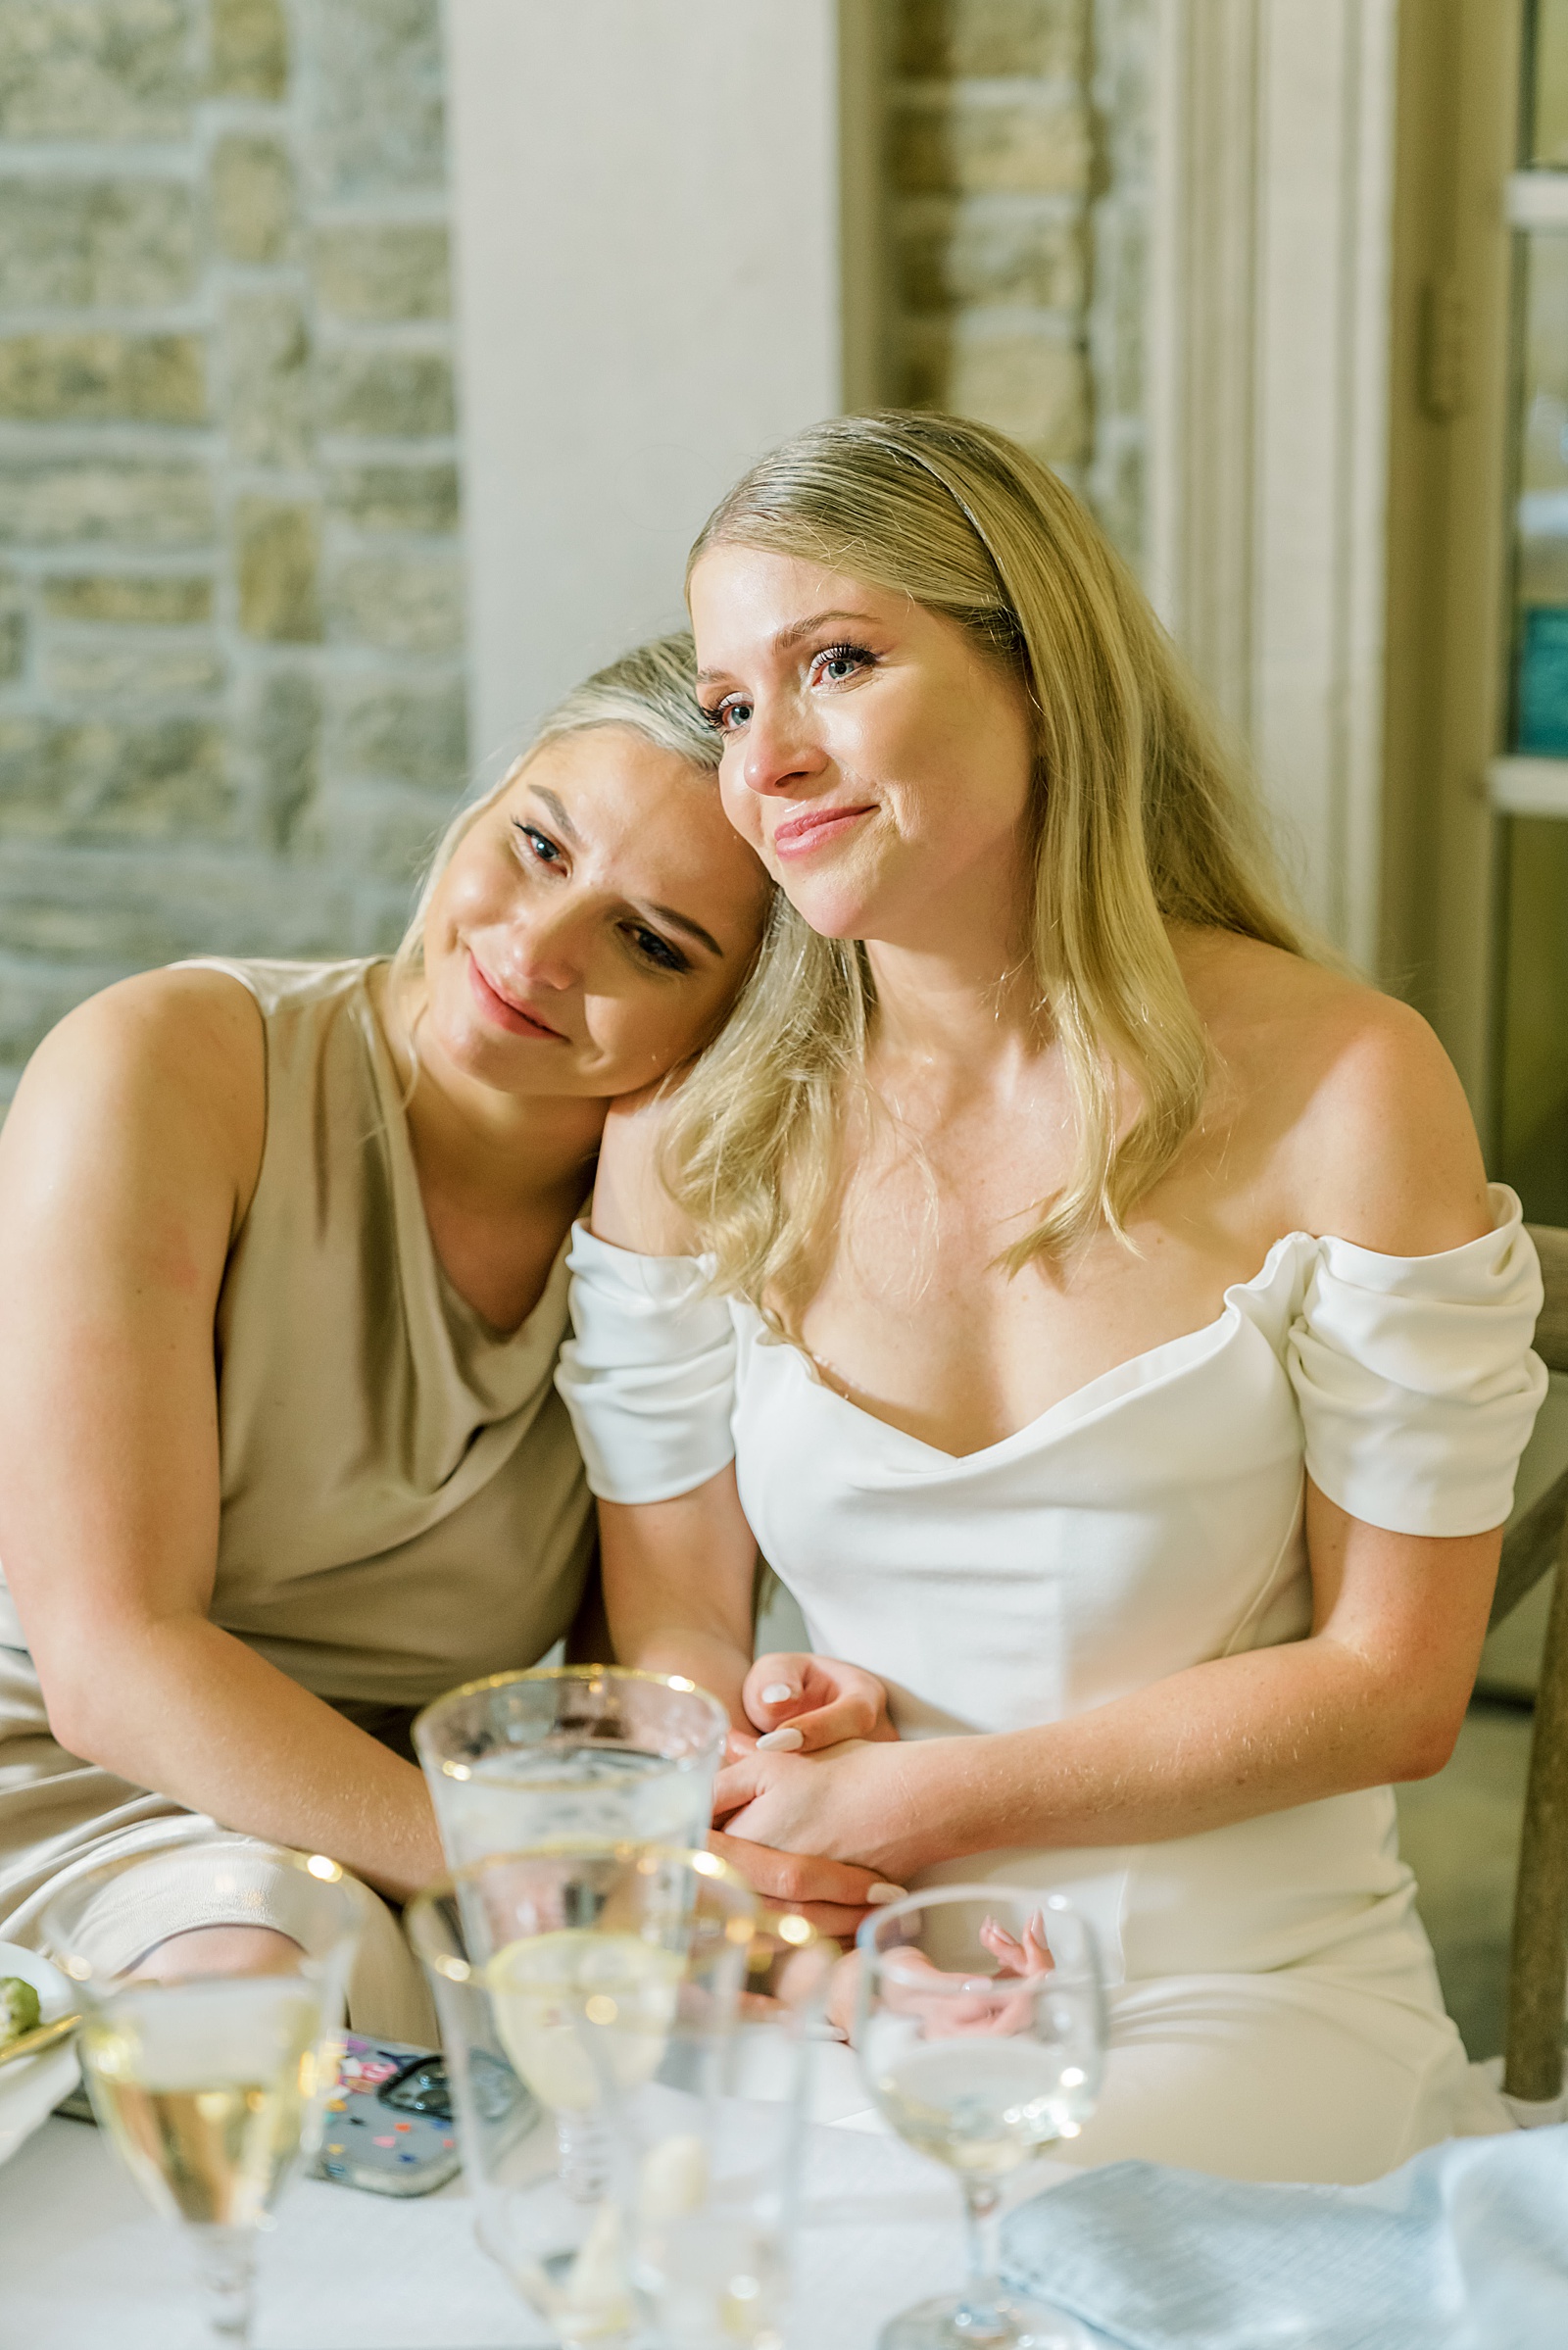 Bride and sister share sweet moment together